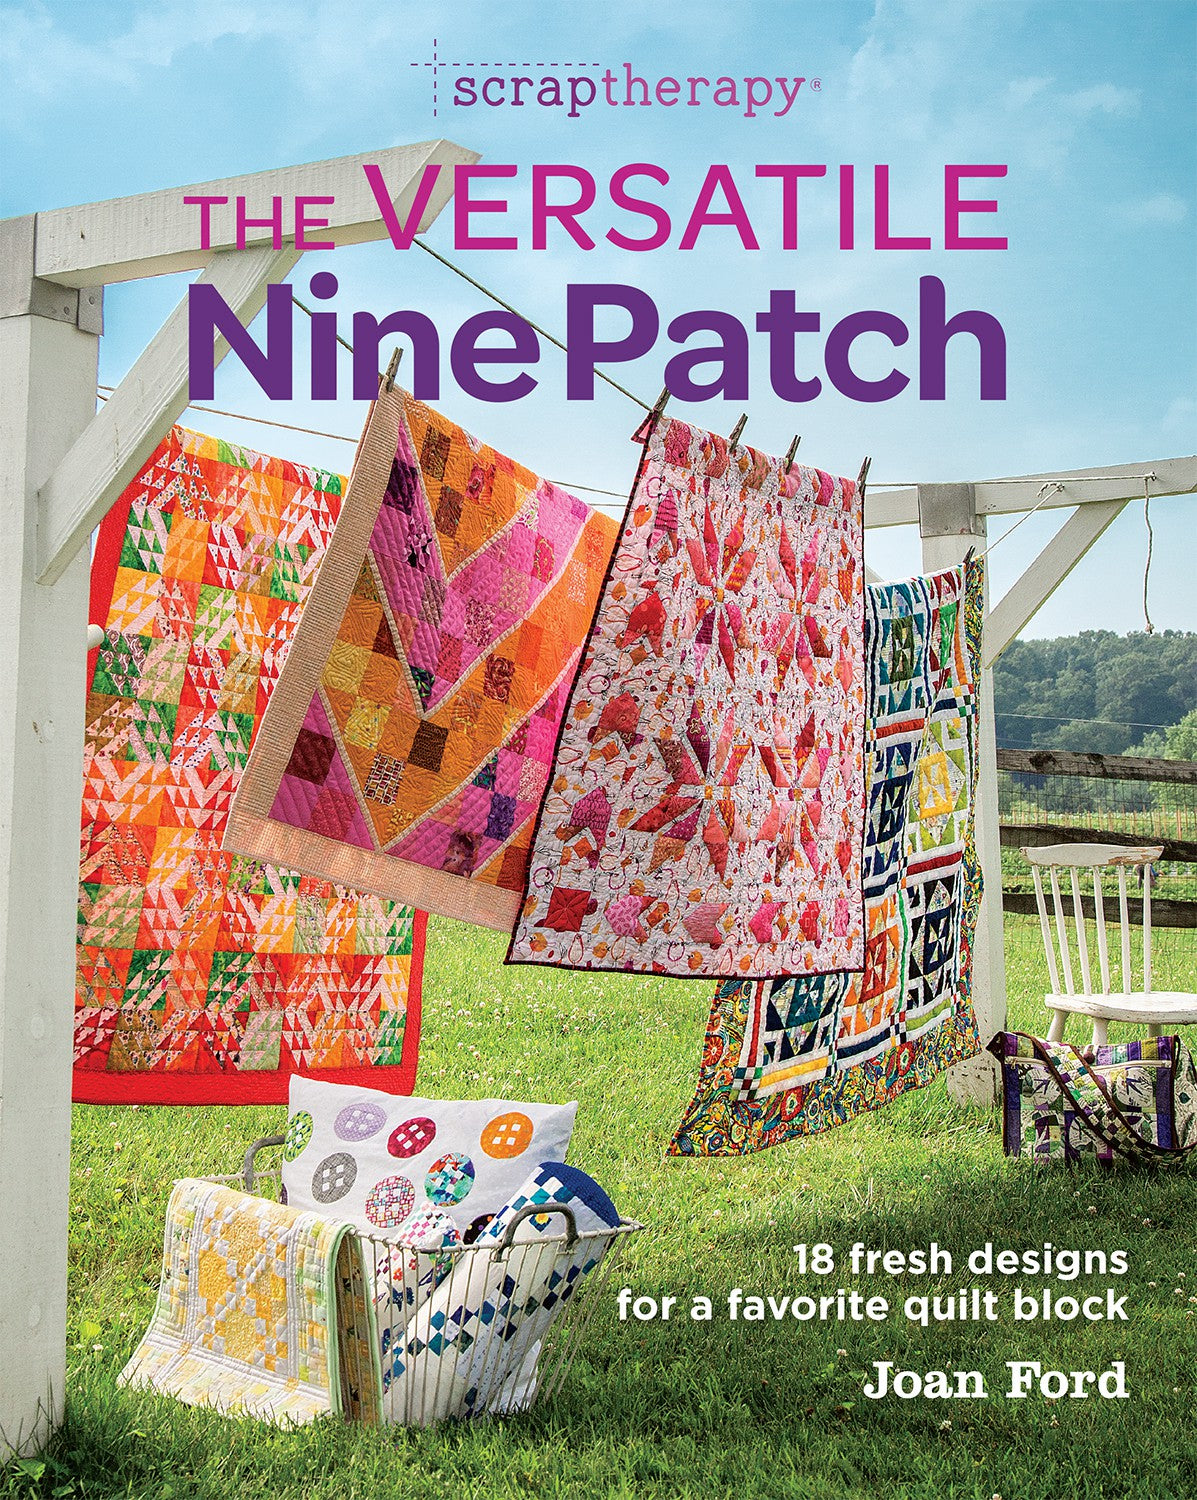 The Versatile Nine Patch by Joan Ford